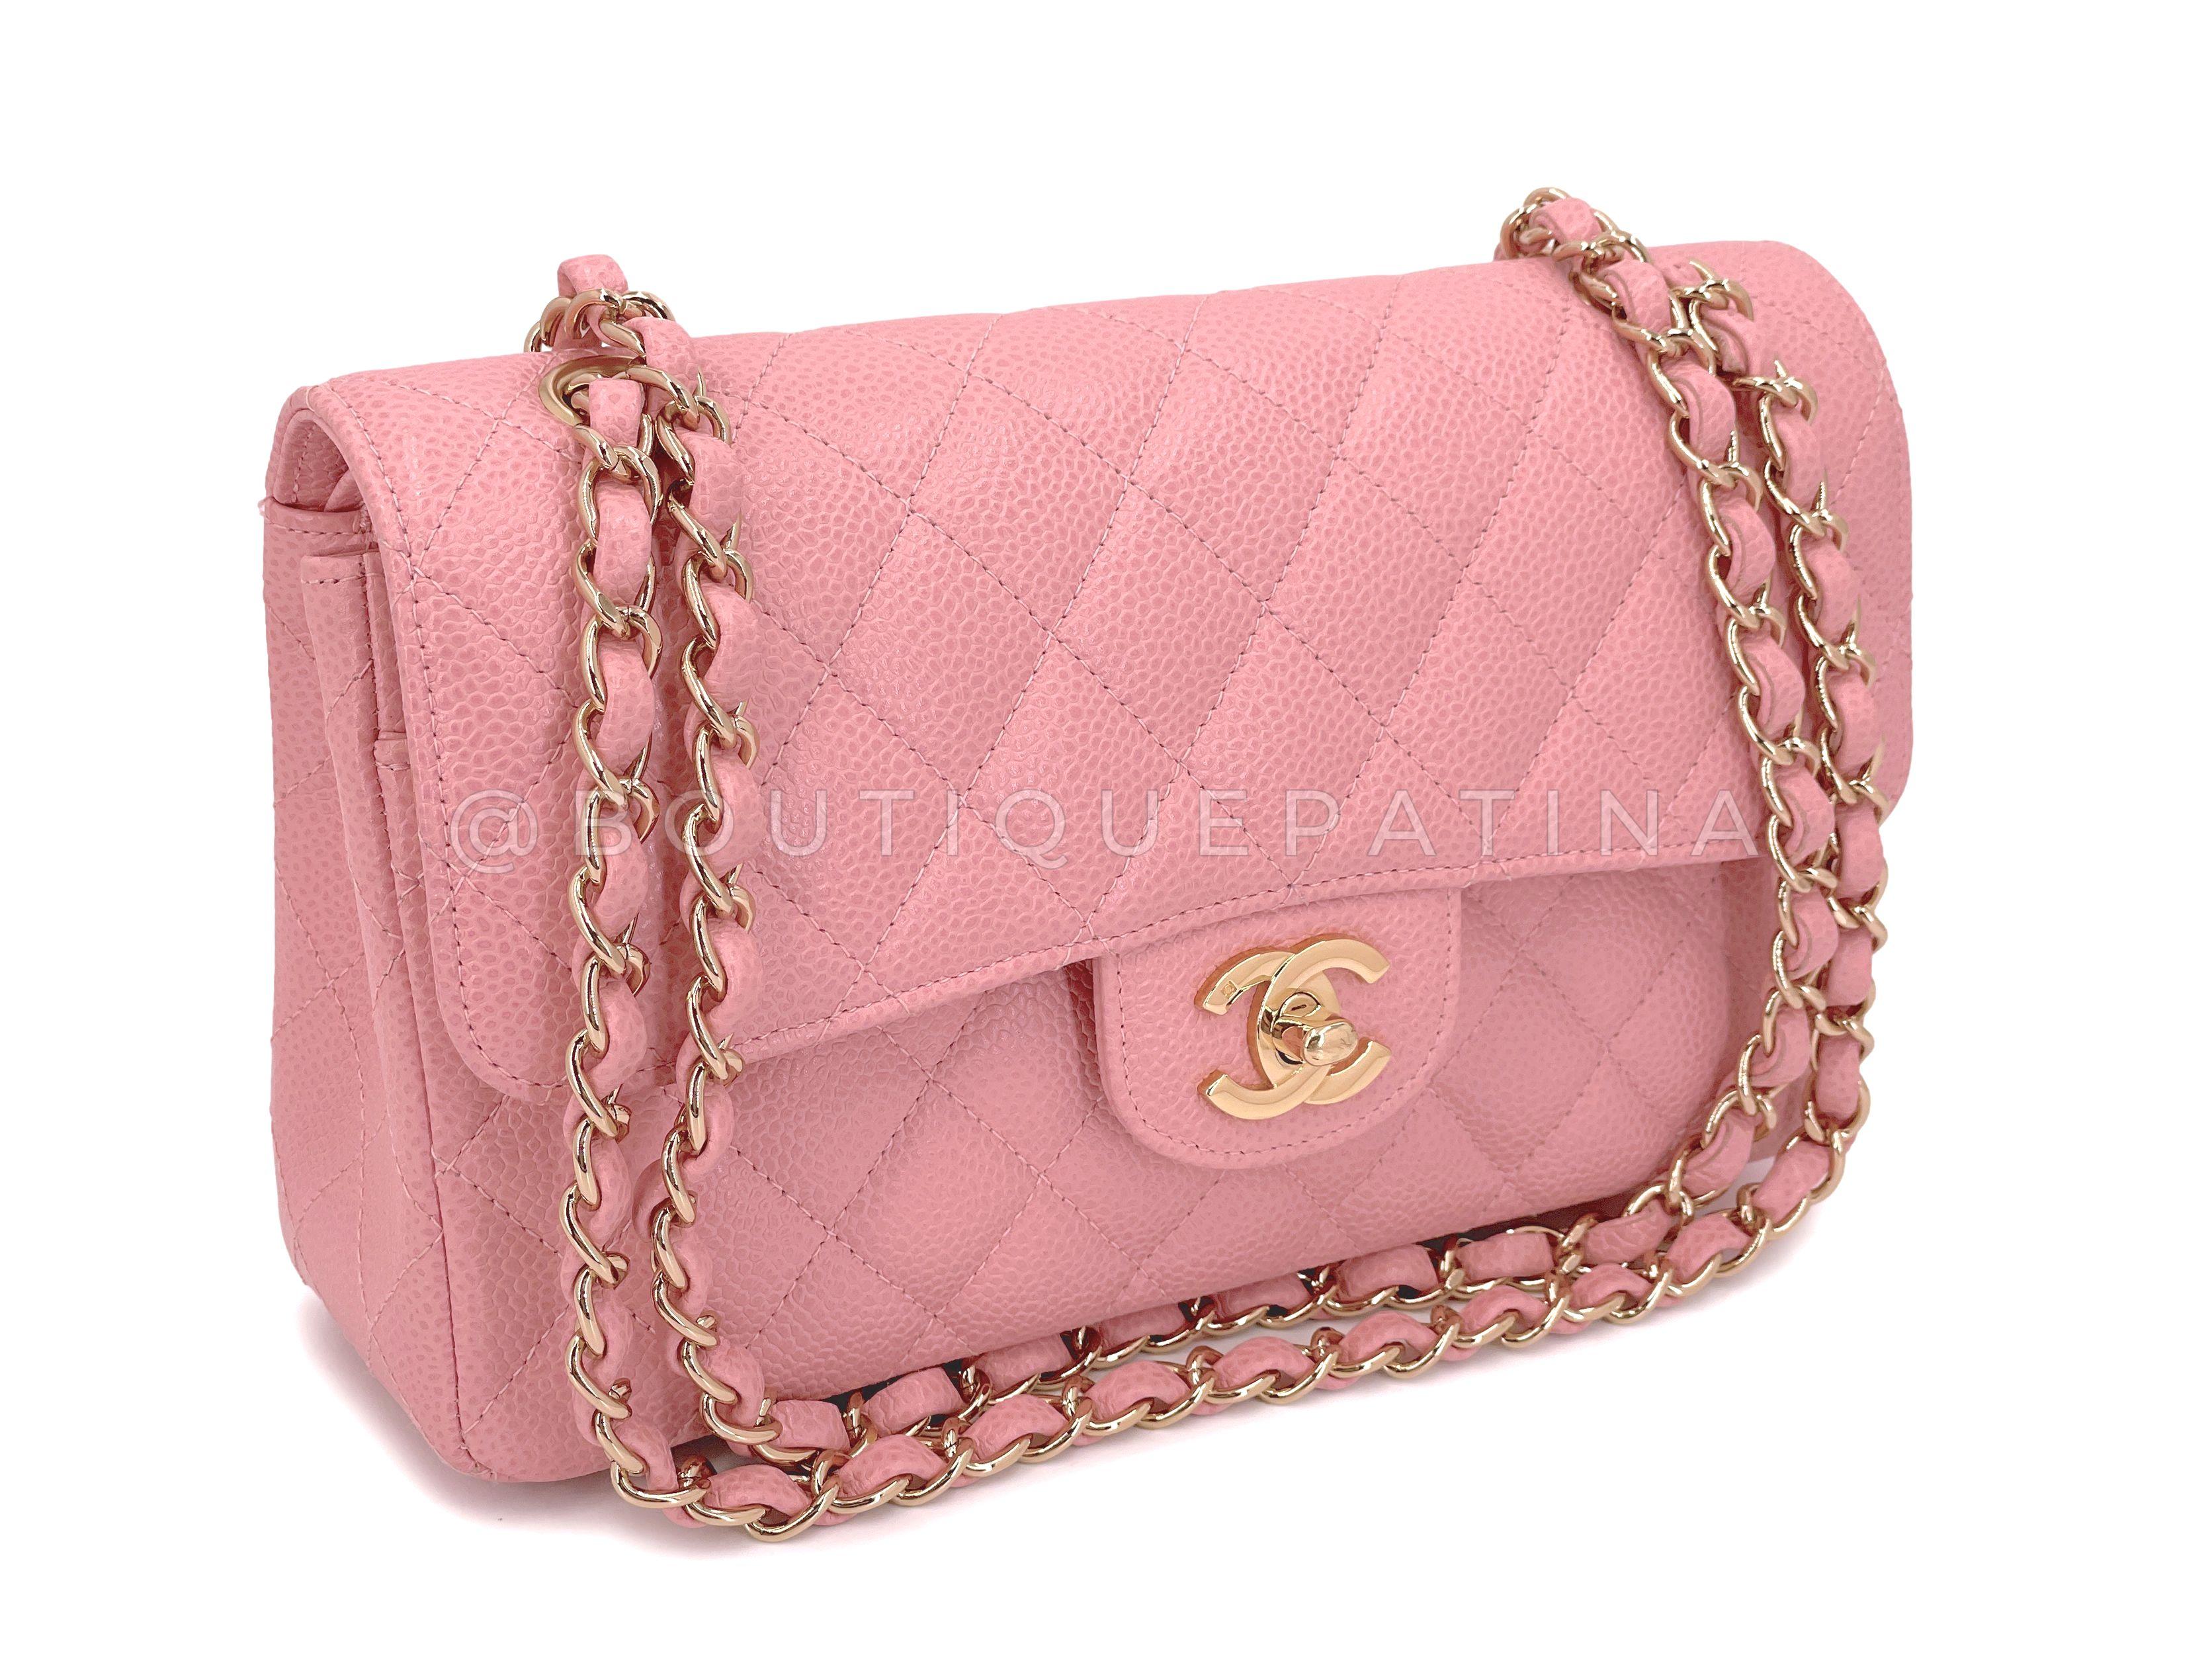 Chanel Bubble Gum Pink Purse - 4 For Sale on 1stDibs